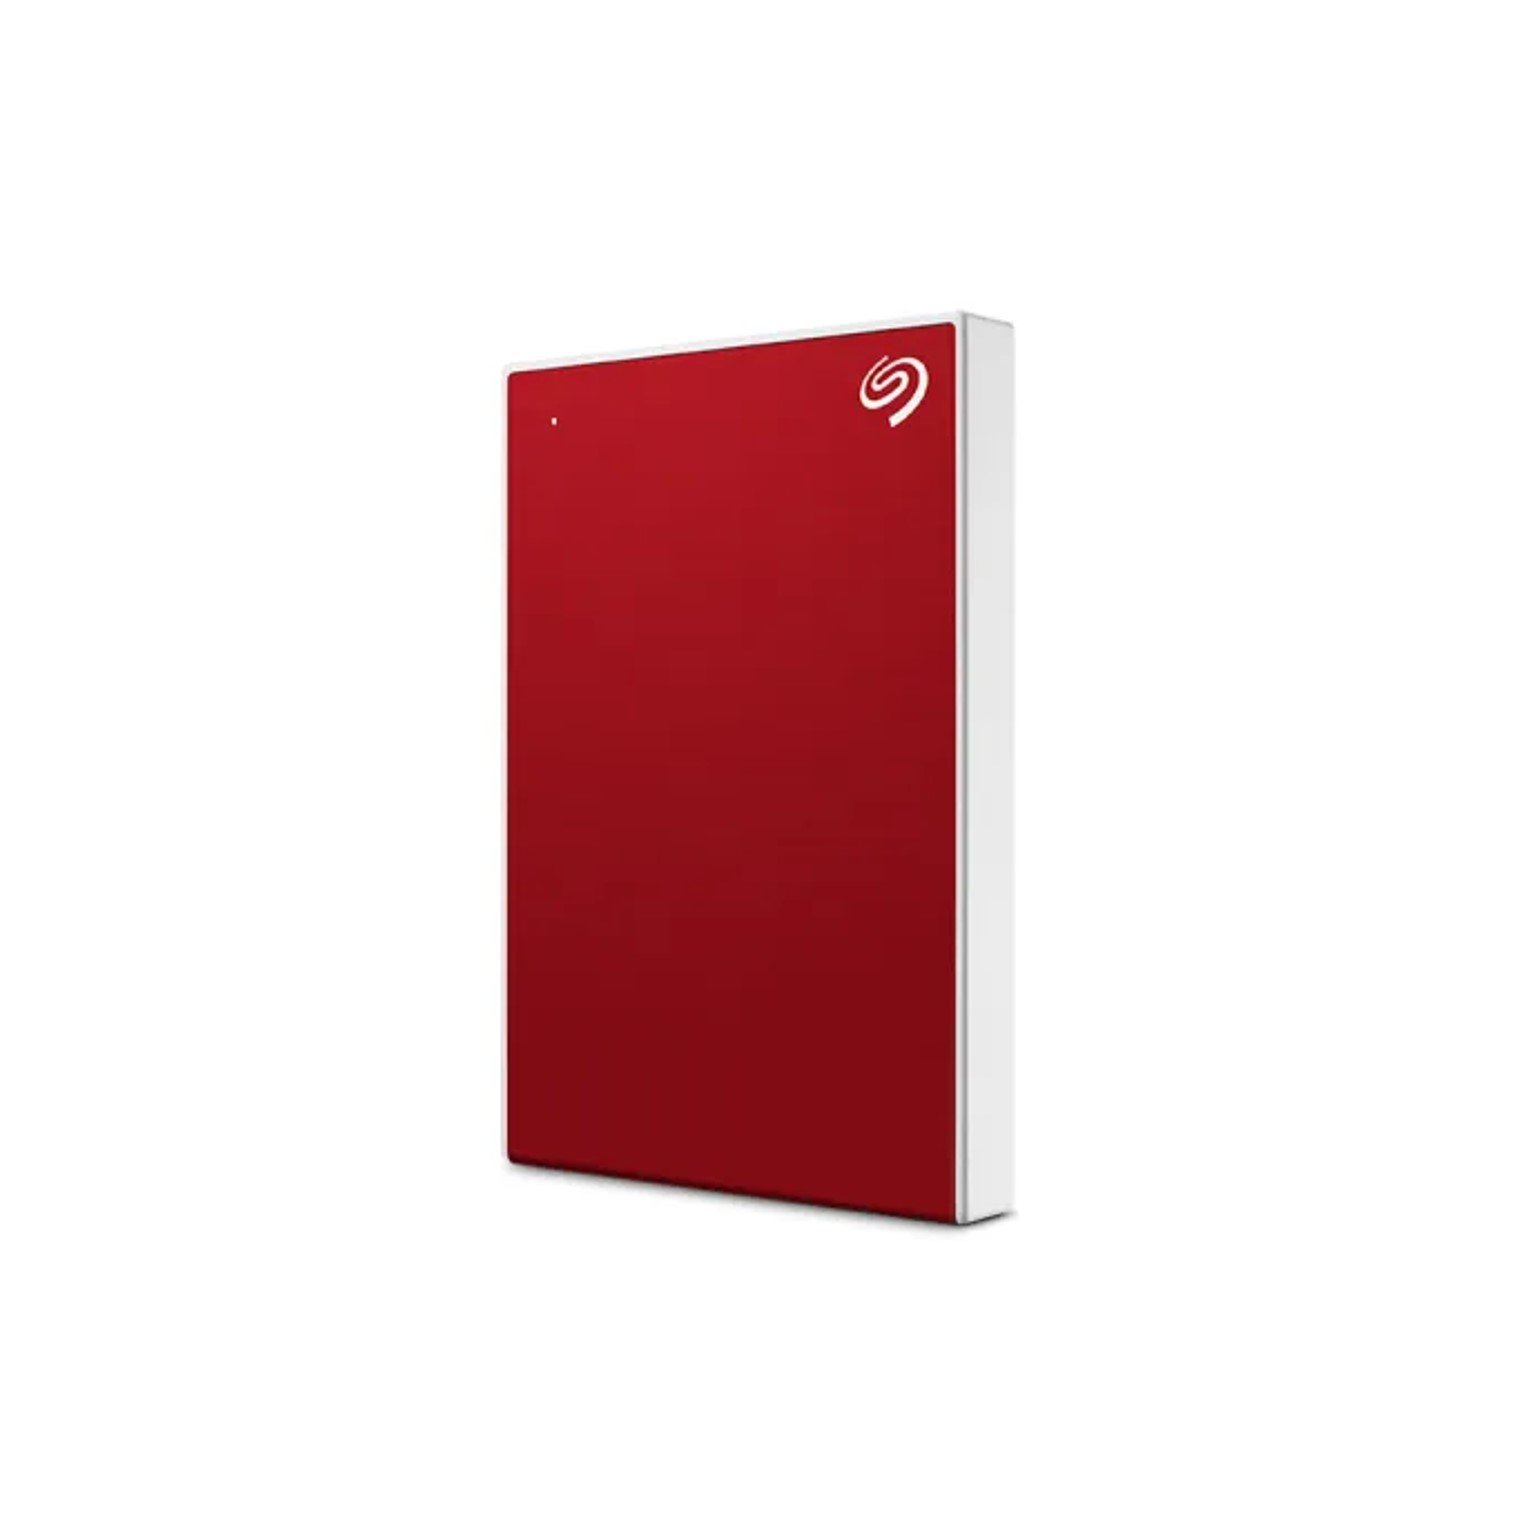 Seagate One Touch HDD with Password  NEW 1TB - USB3.0 - Red